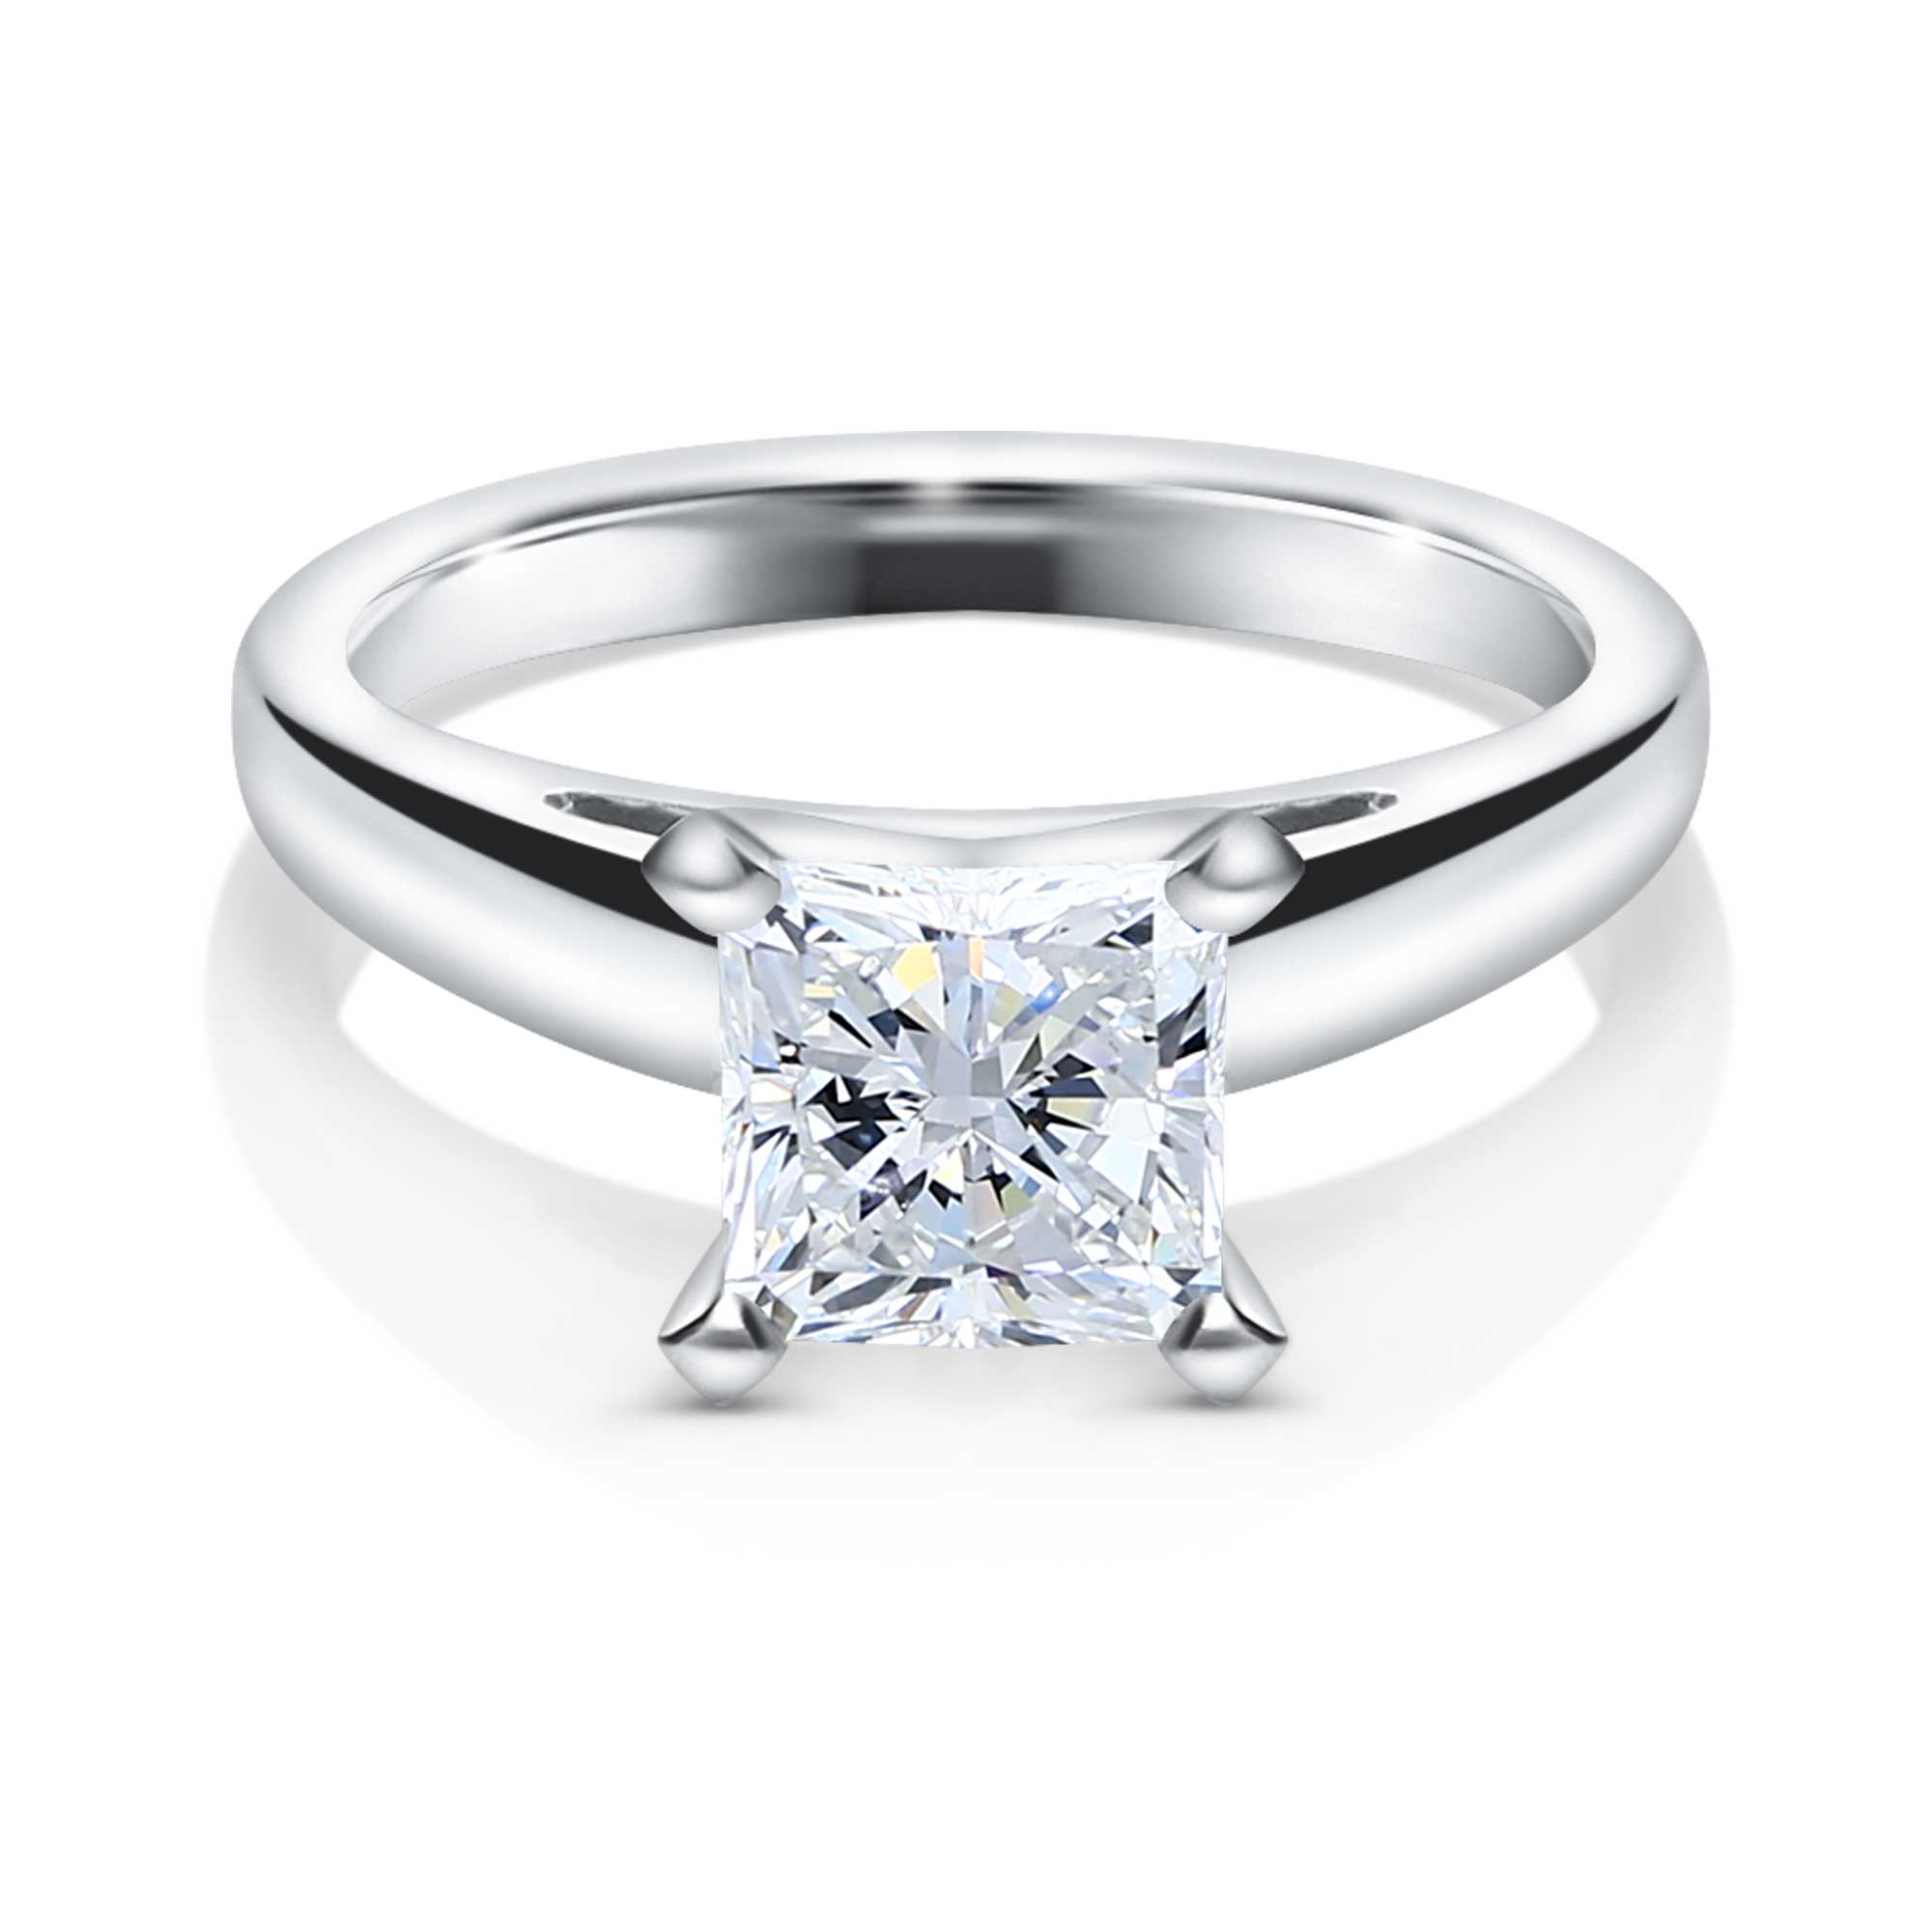  Engagement  Ring  Solitaire  Princess  Cut  Richards Jewelry 